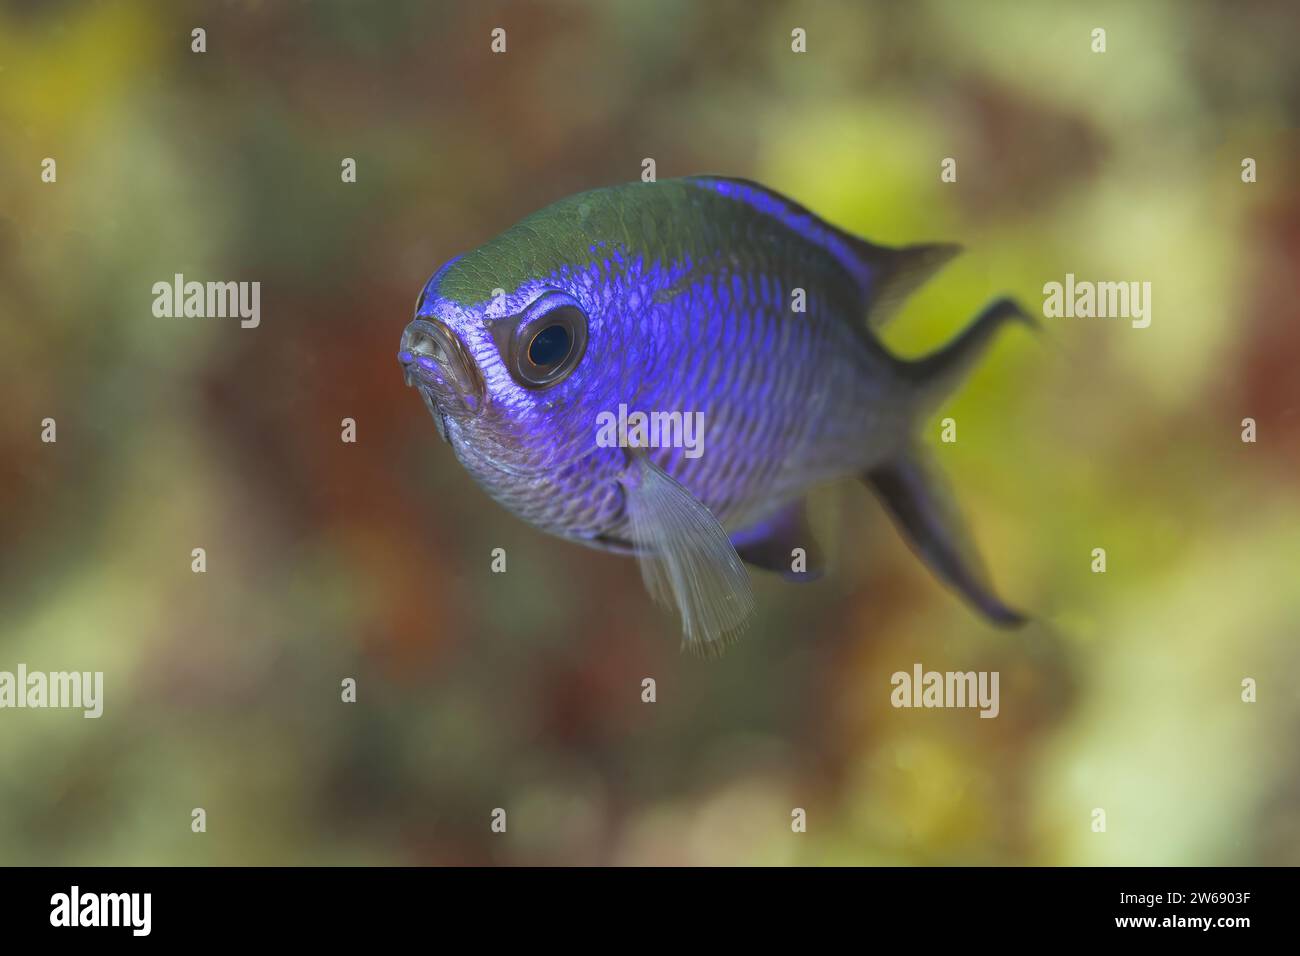 A vibrant blue damselfish glides through a colorful coral reef background. Stock Photo